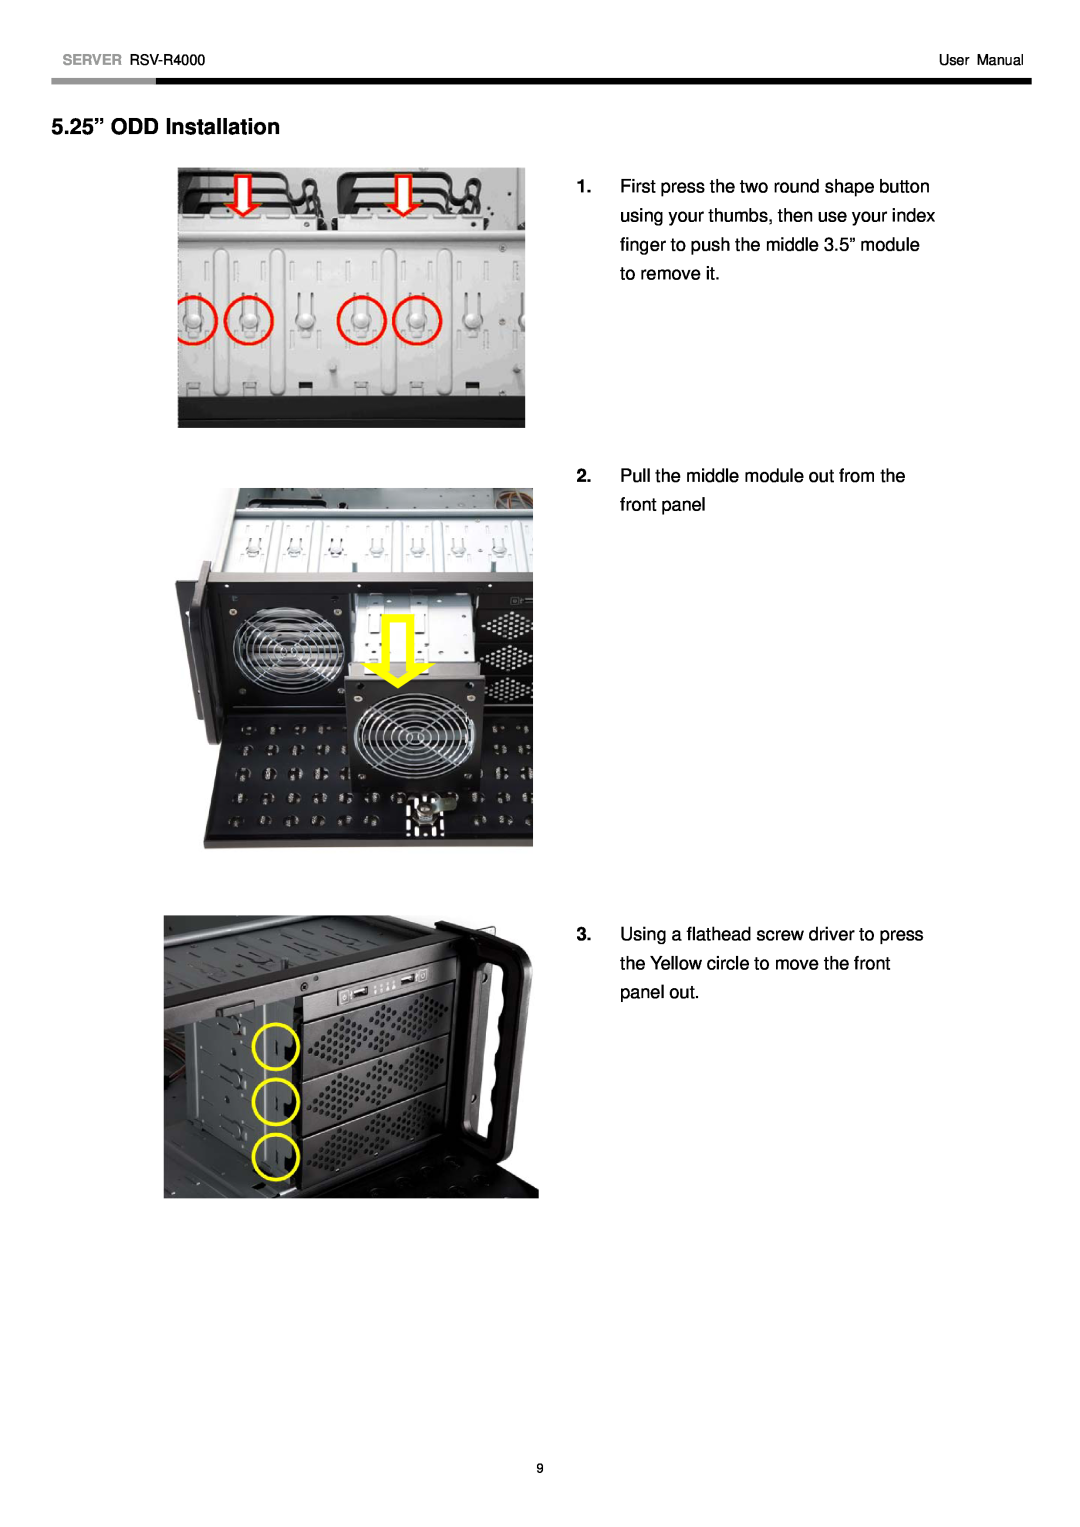 Rosewill RSV-R4000 user manual 5.25” ODD Installation, Pull the middle module out from the front panel 